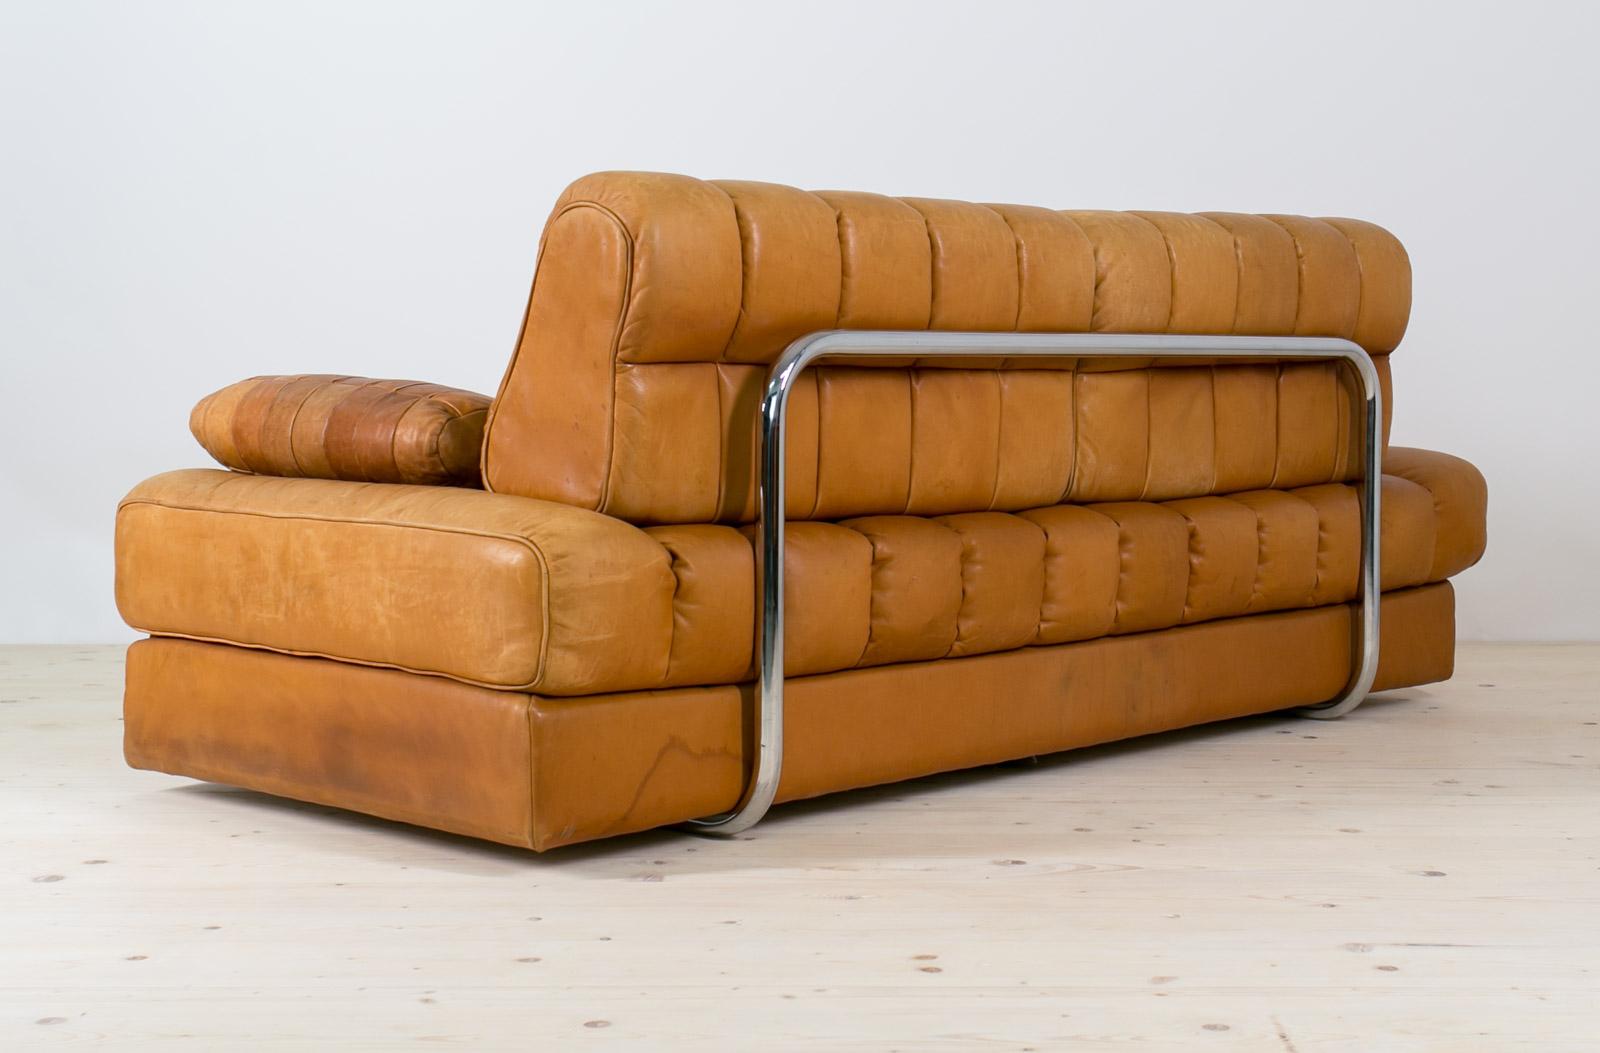 Vintage Swiss De Sede Sofa Bed from the 1960s, model DS 85 1